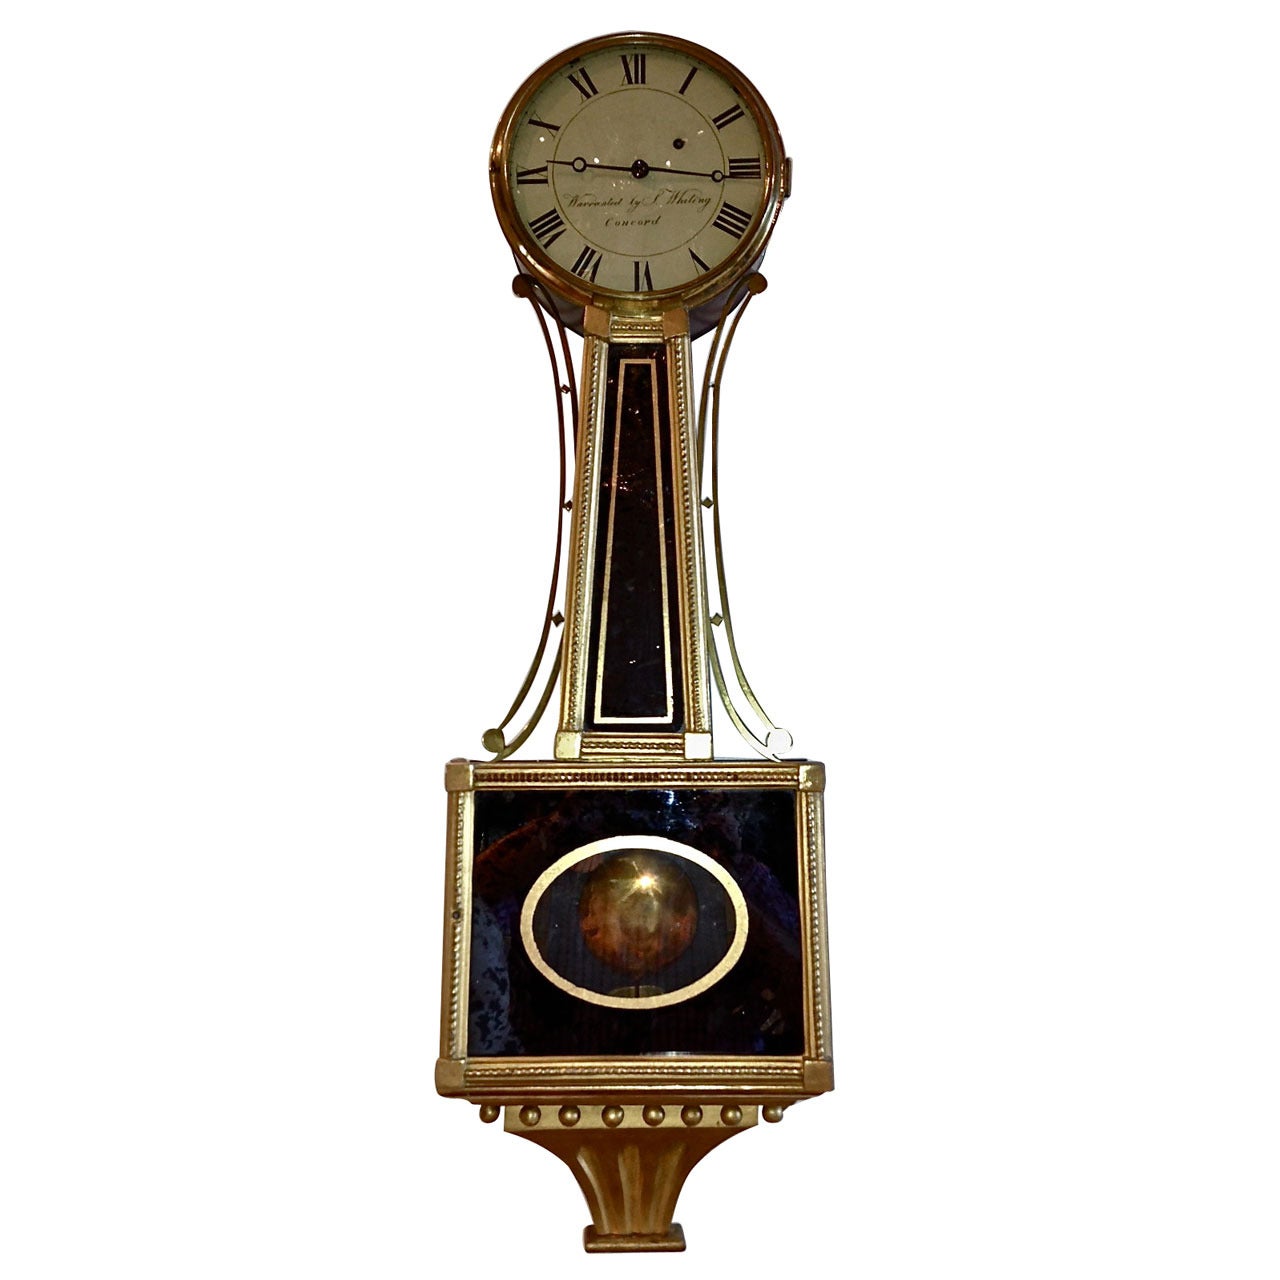 Period American Federal Banjo Clock by Samuel Whiting, Concord, MA